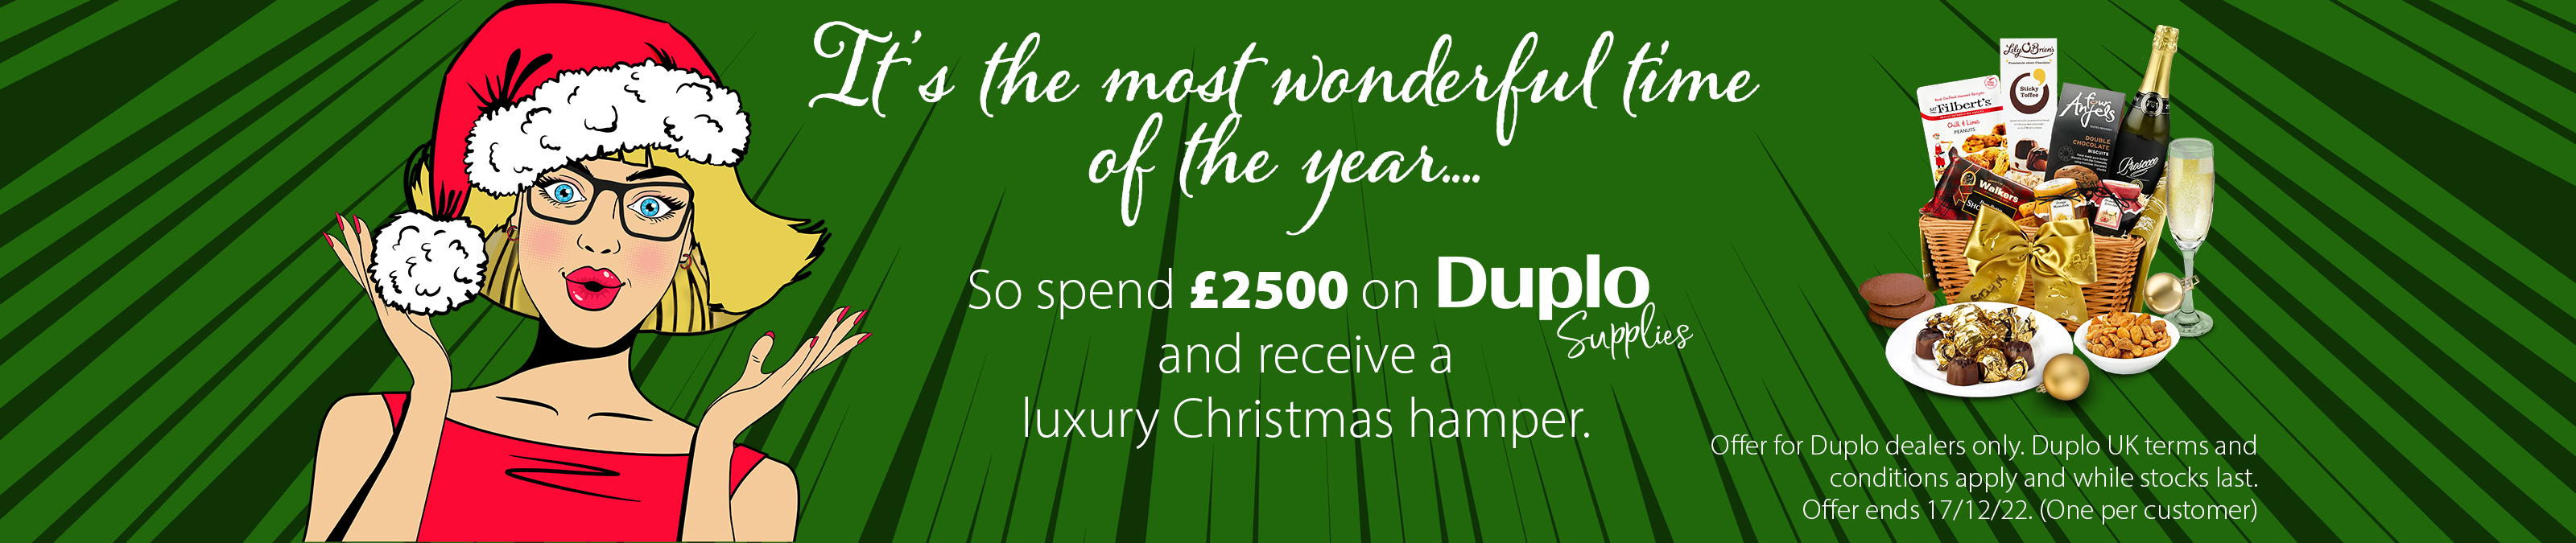 Duplo Supplies Christmas Offer